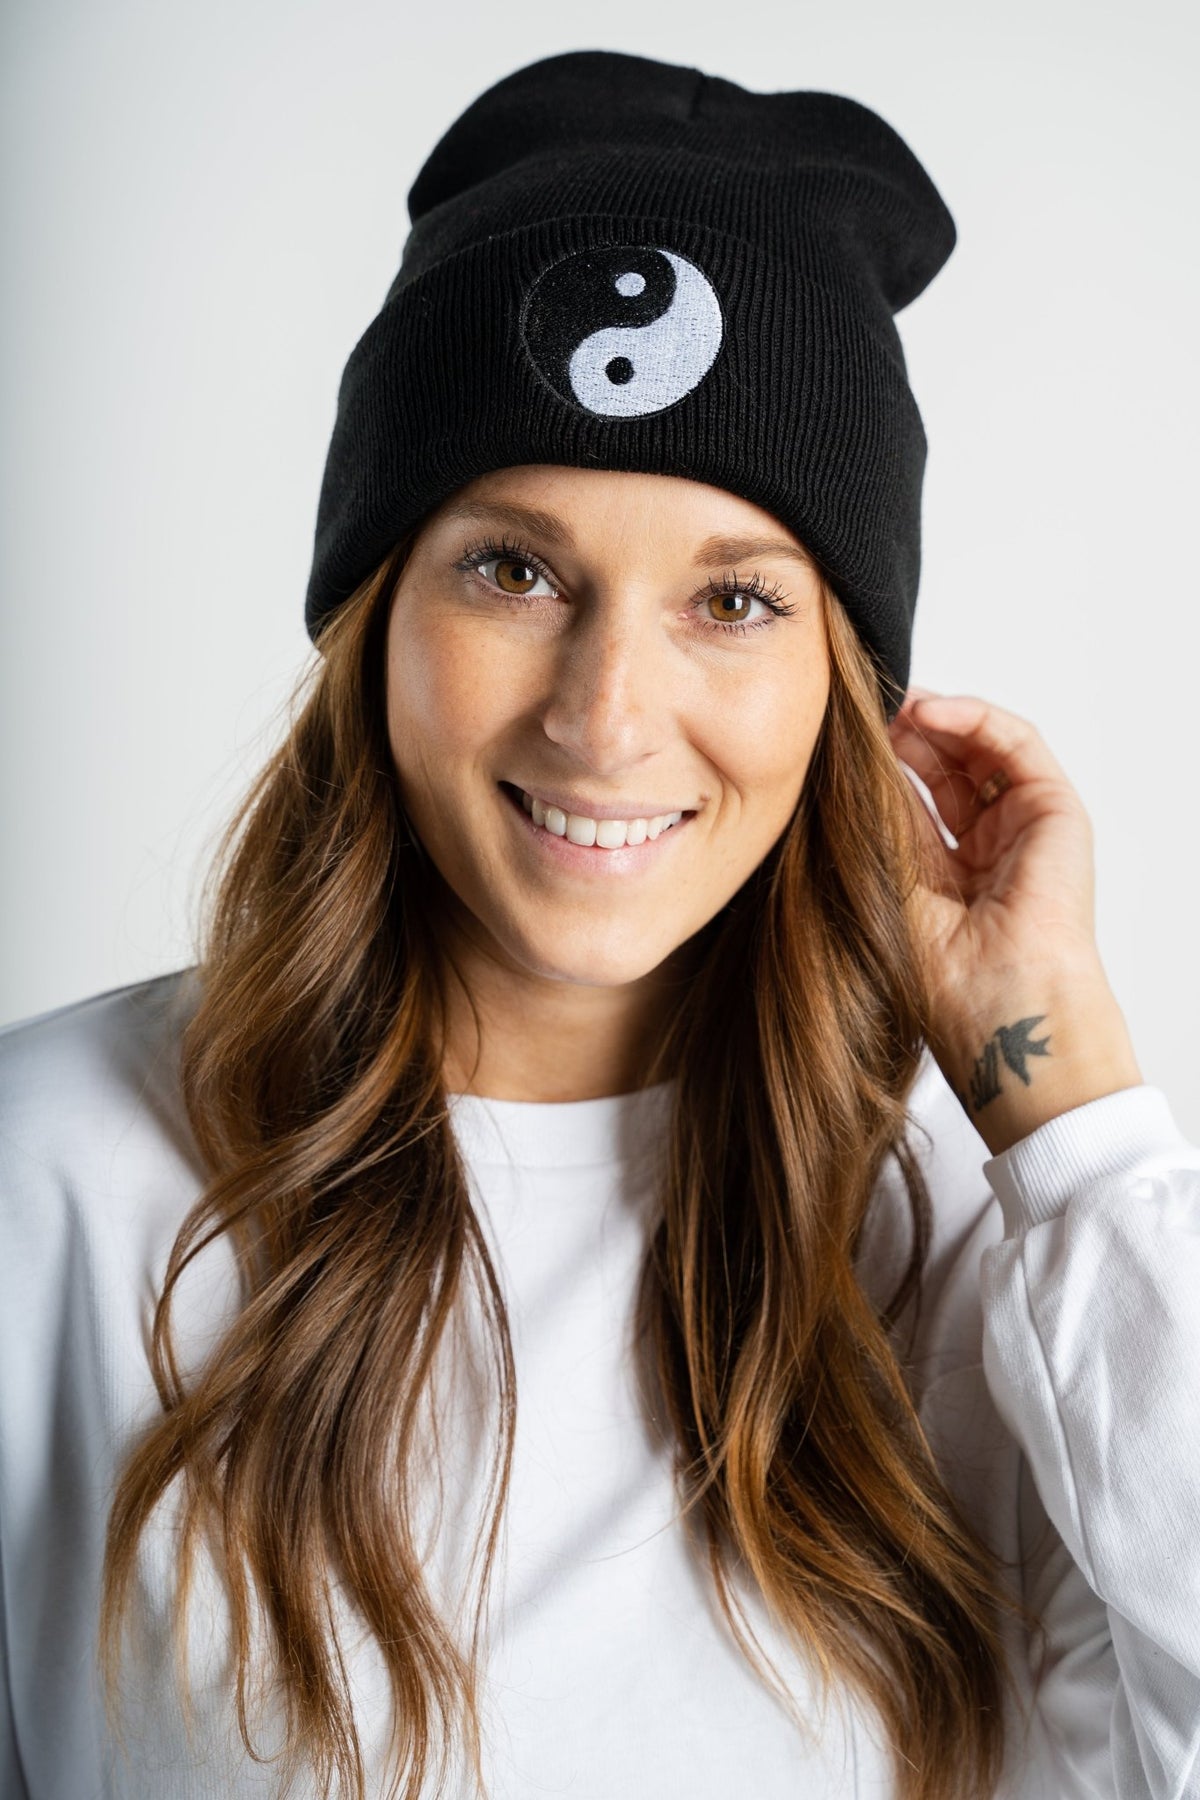 Yin yang beanie black - Trendy Beanies at Lush Fashion Lounge Boutique in Oklahoma City